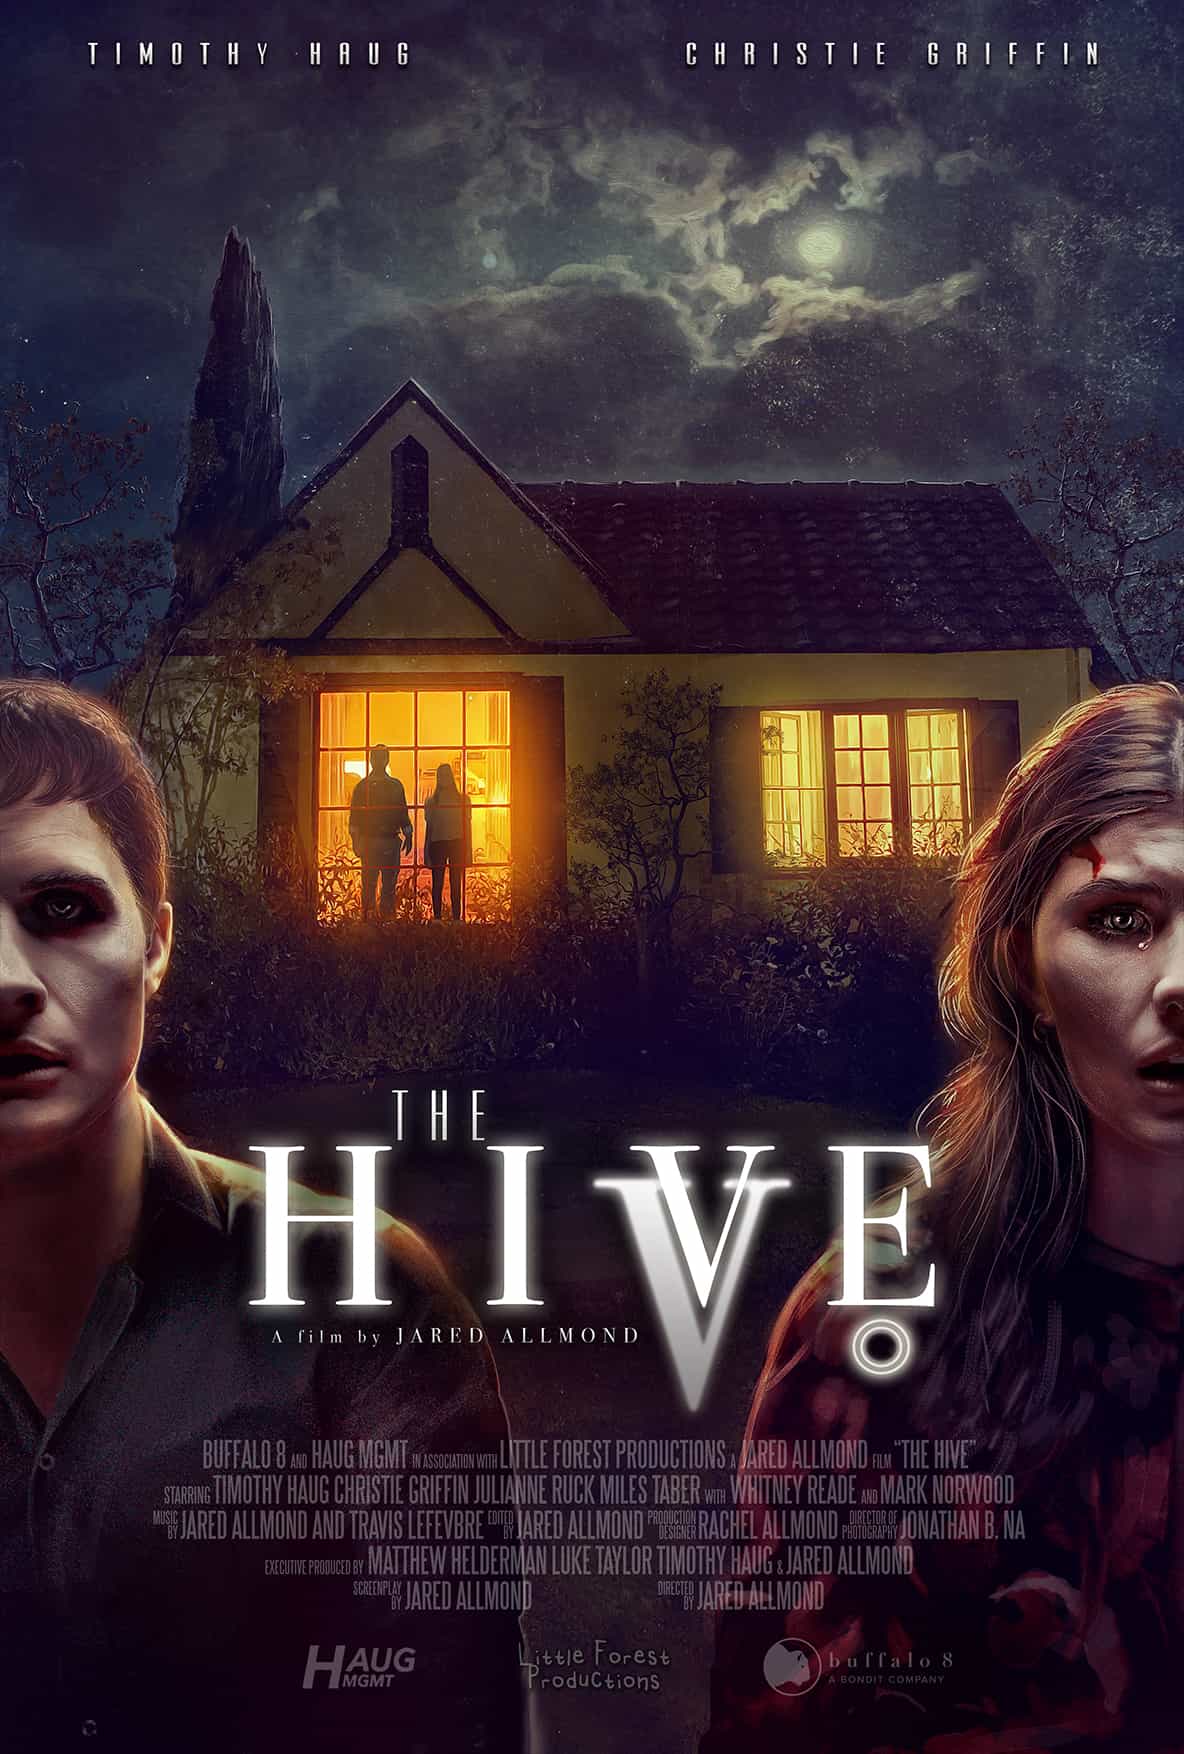 The Hive Premieres on North American VOD October 27 3